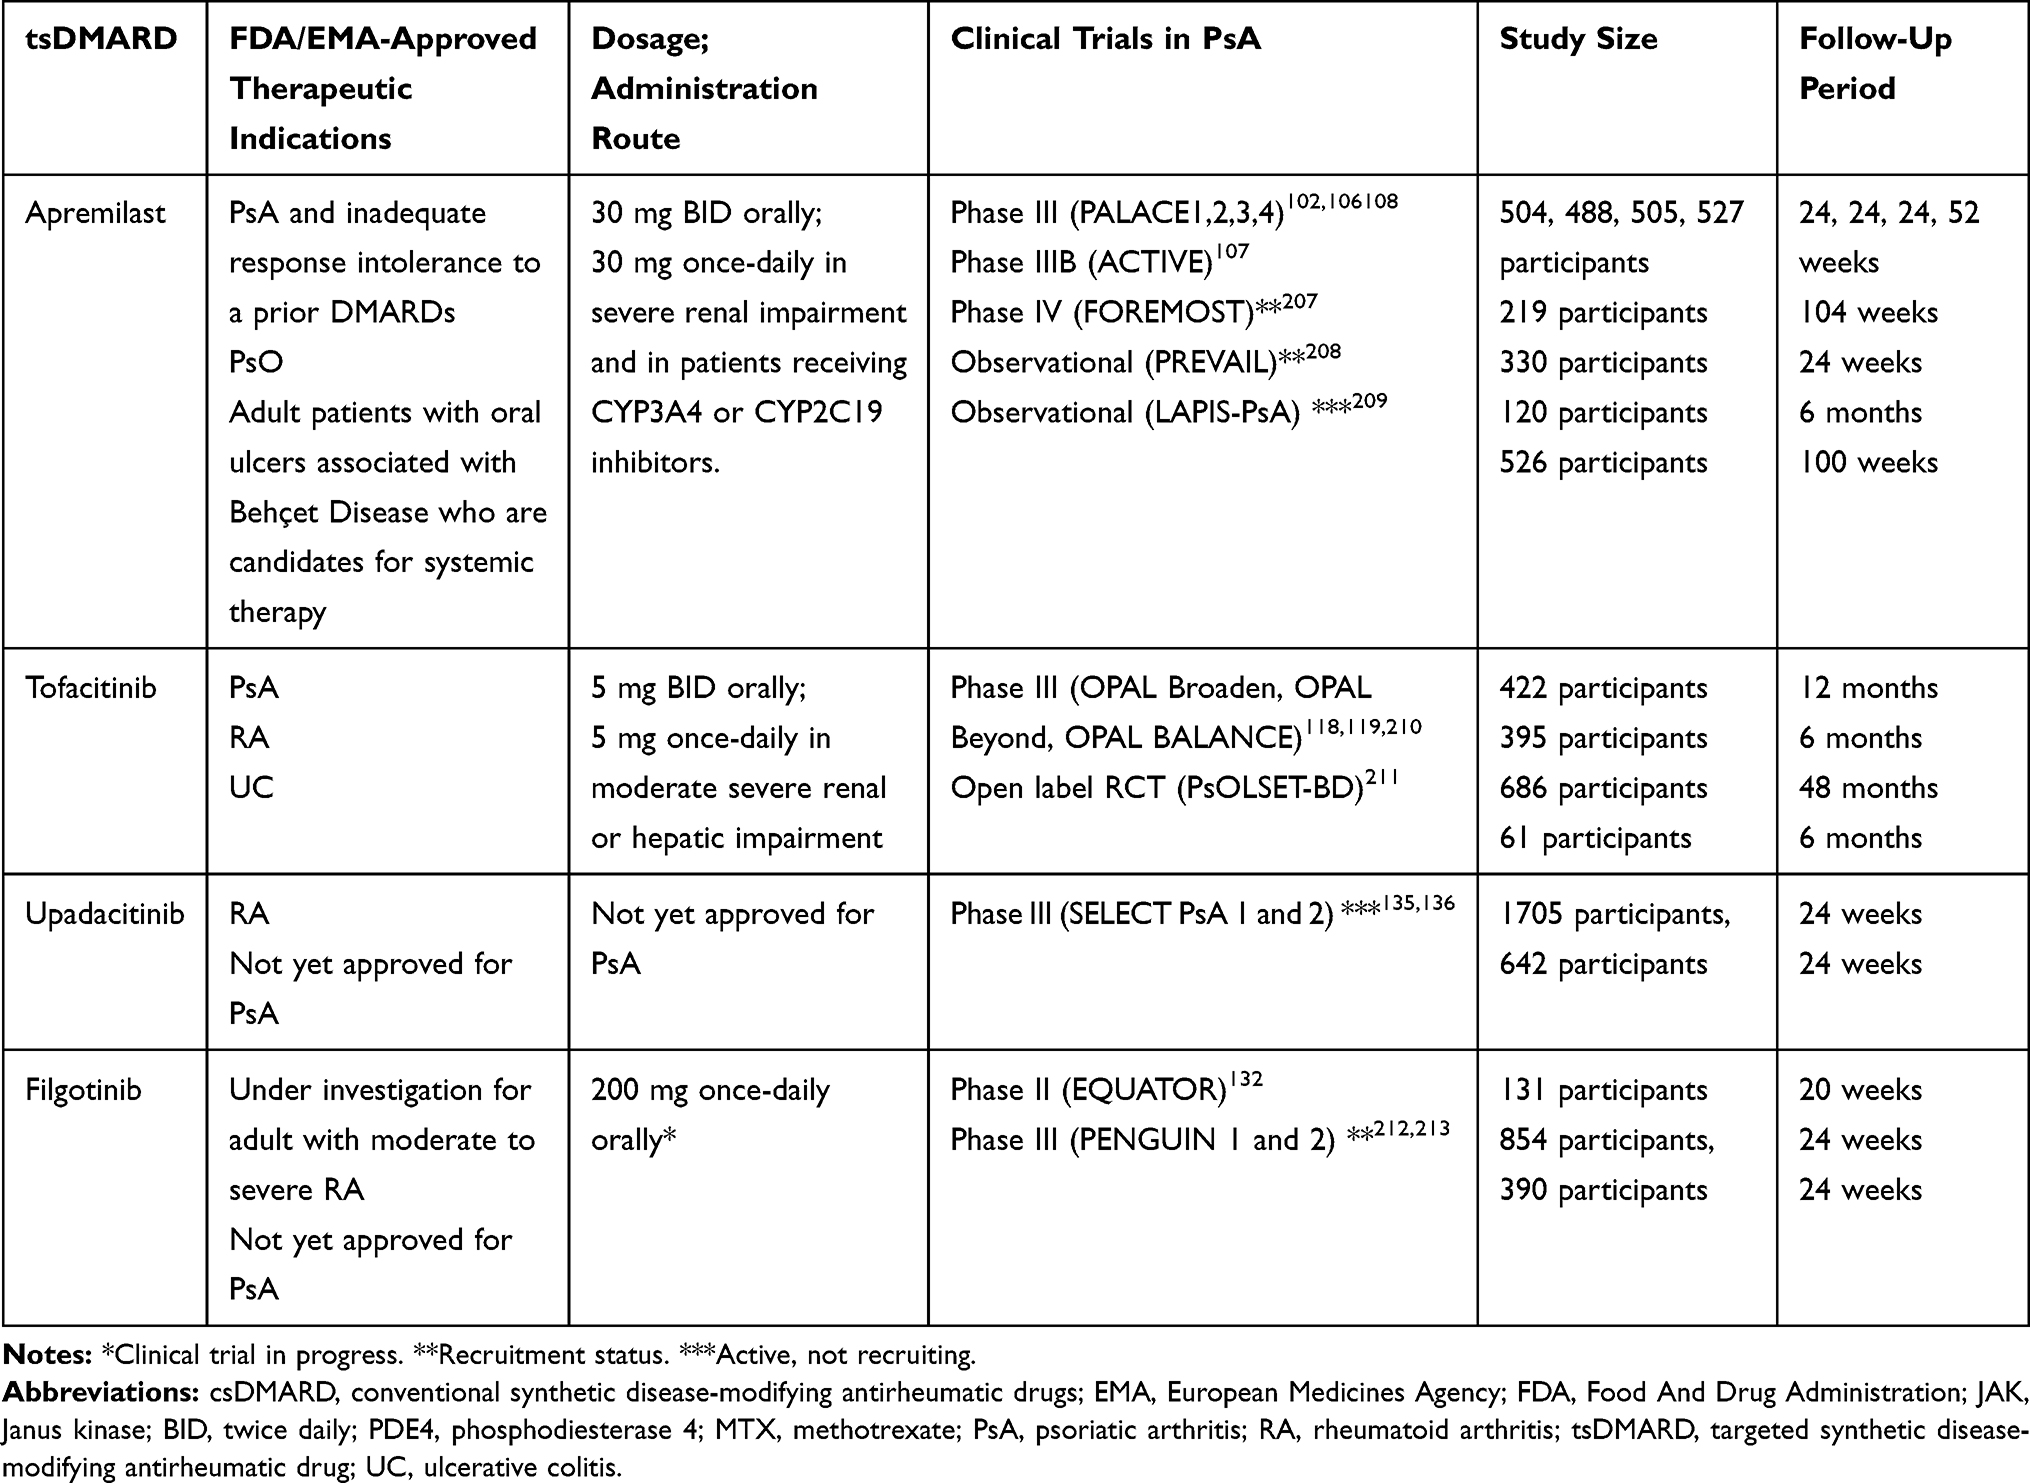 Sex-related differences in patient characteristics, and efficacy and safety  of advanced therapies in randomised clinical trials in psoriatic arthritis:  a systematic literature review and meta-analysis - The Lancet Rheumatology